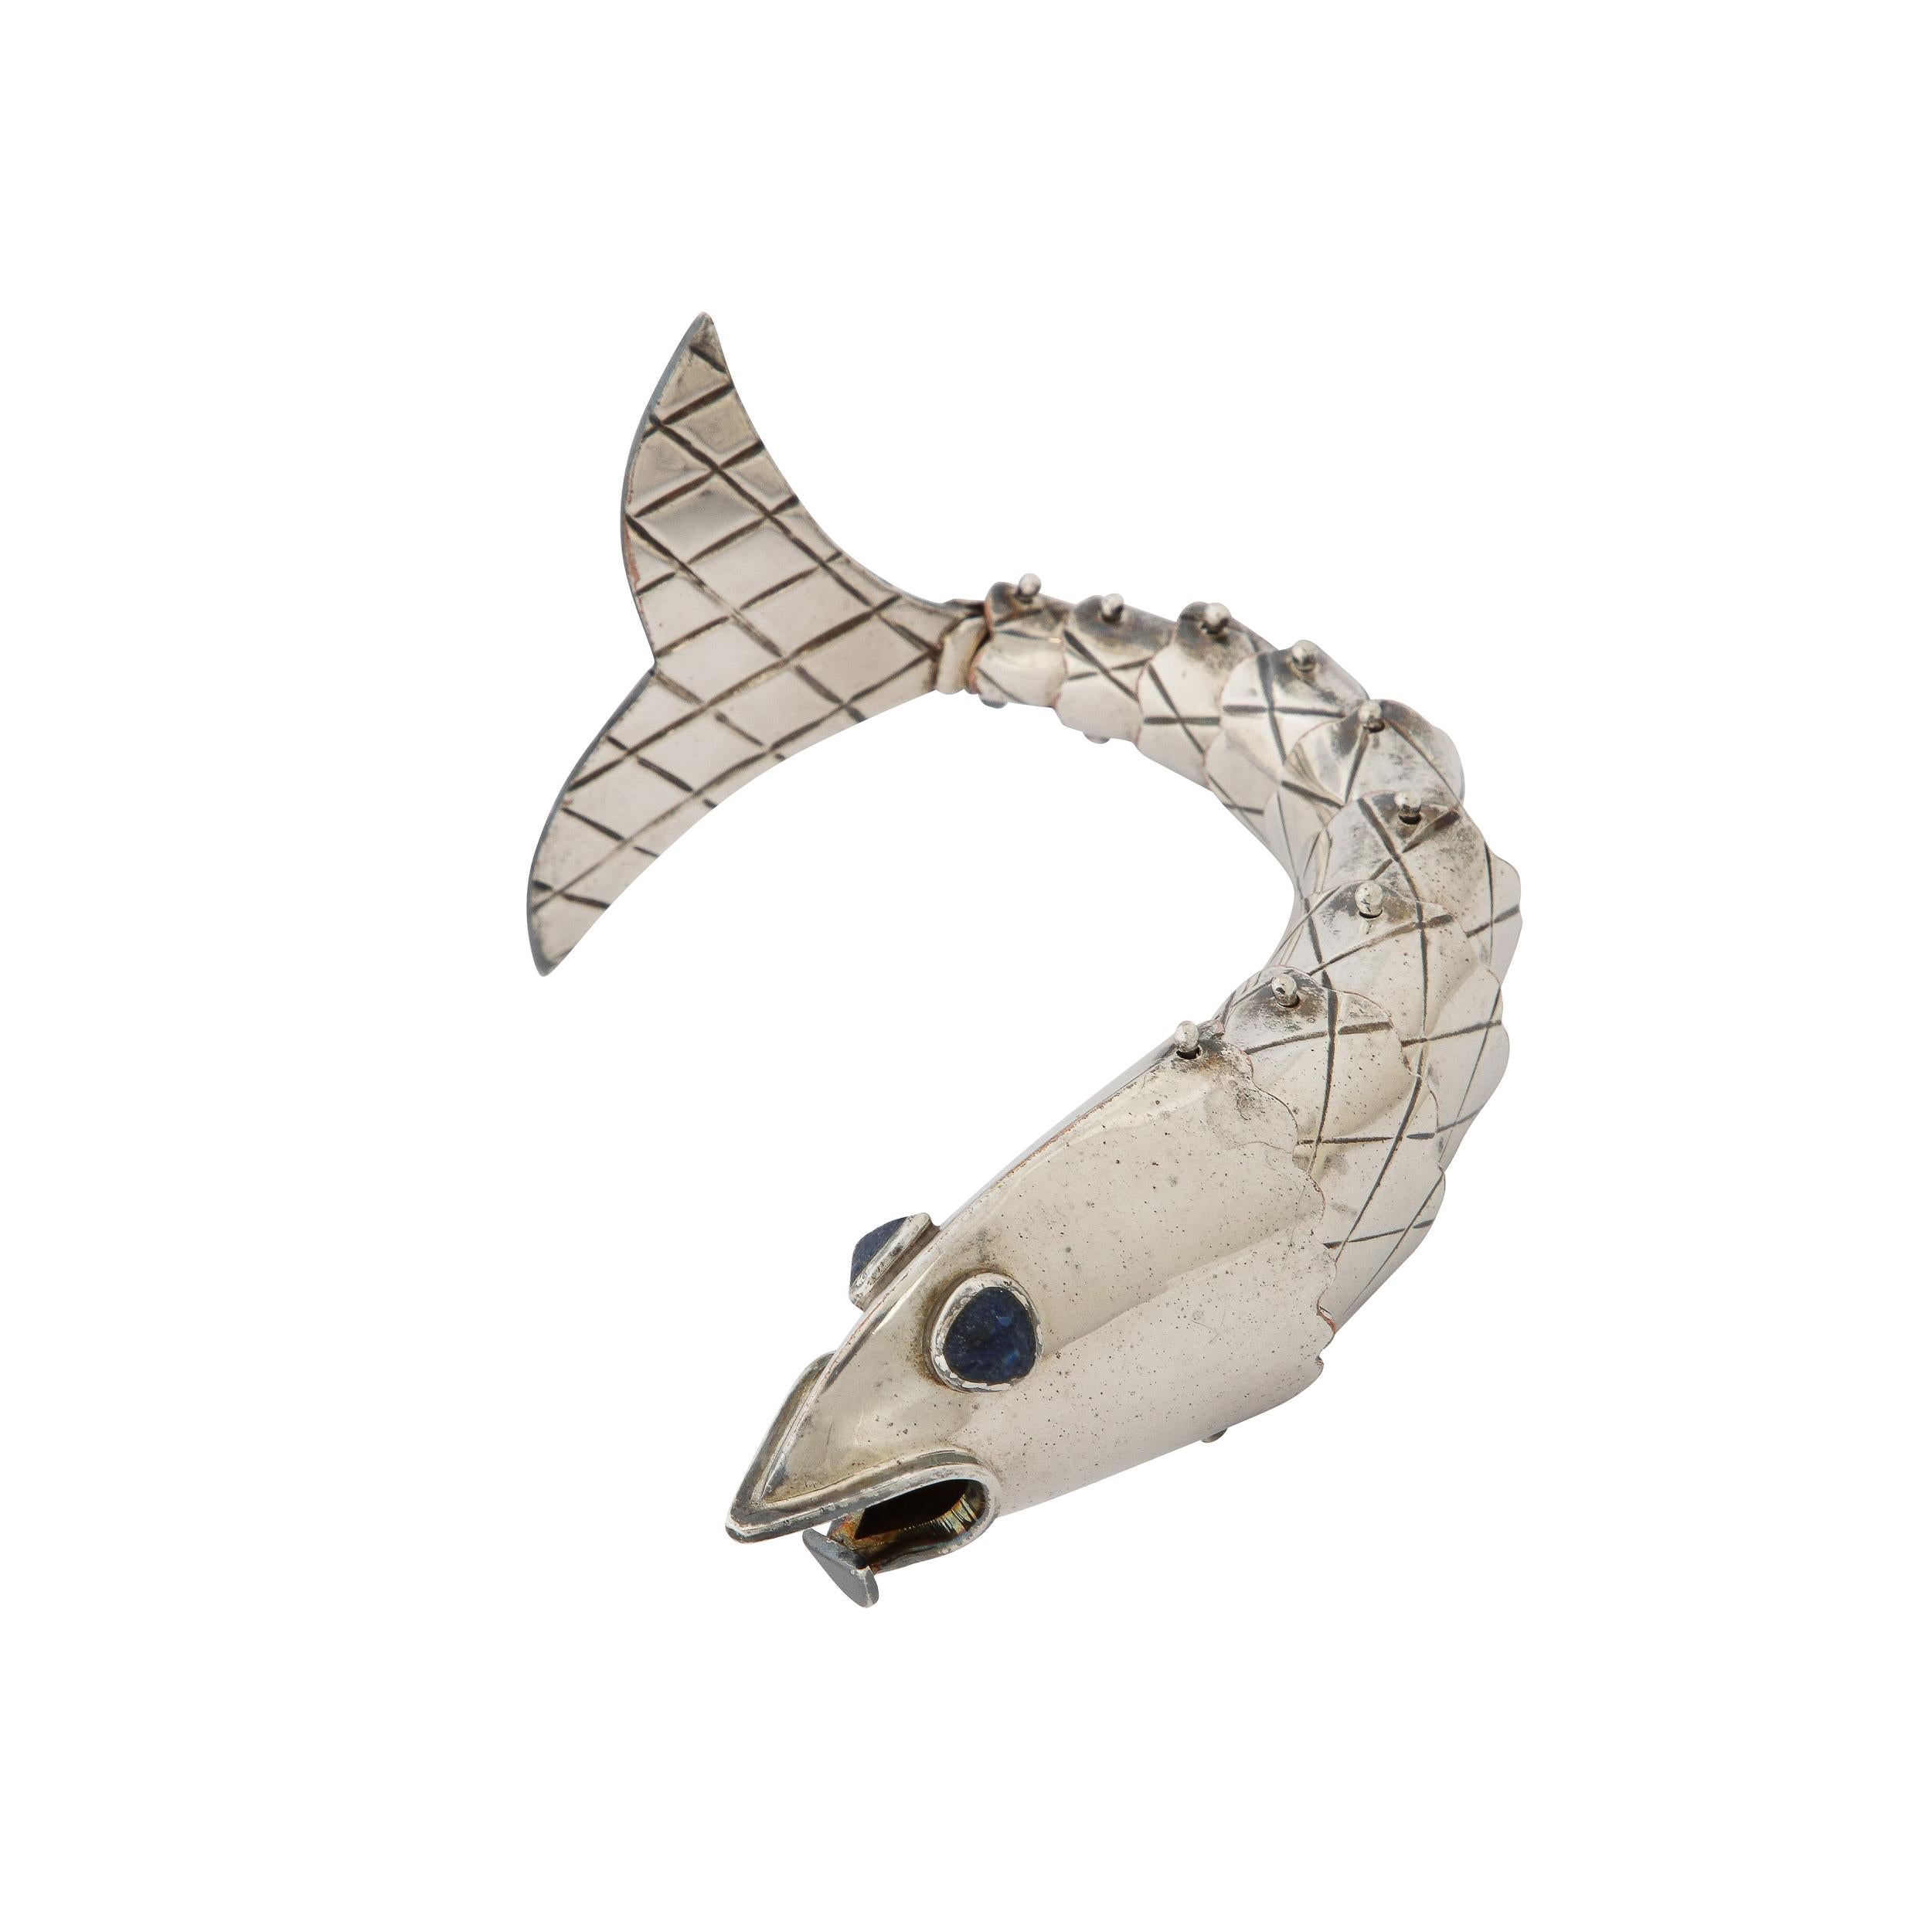 This sophisticated bottle opener was realized by the esteemed modernist design Emilia Castillo in Mexico circa 1980. It offers a stylized interpretation of a small schoolfish (such as a sardine) rendered in a whimsical, yet highly refined manner.